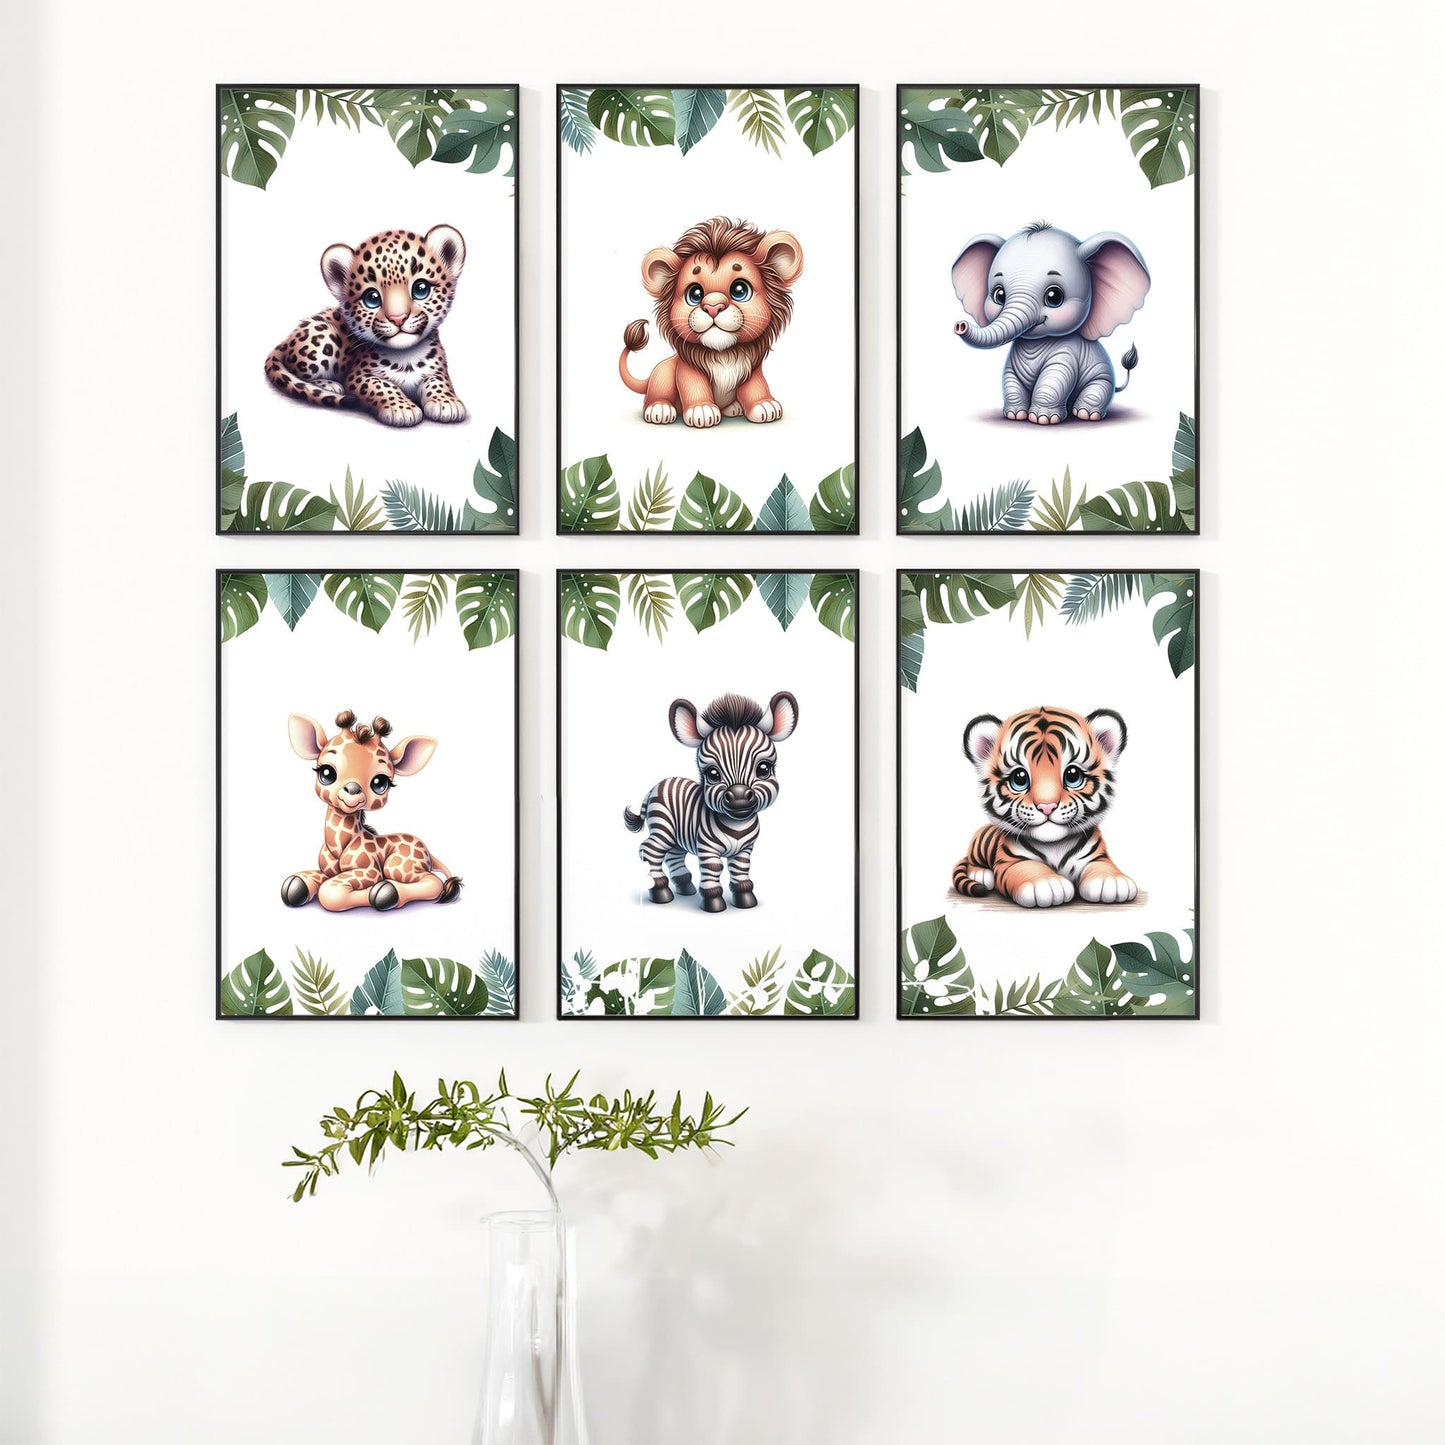 Set of six A4 prints featuring safari animals - lion cub, tiger cub, cheetah cub, elephant, giraffe, and zebra. The animals are depicted as baby animals, in a cartoony and bright style reminiscent of coloured pencil drawings. Jungle-style leaves adorn the edges of the prints.